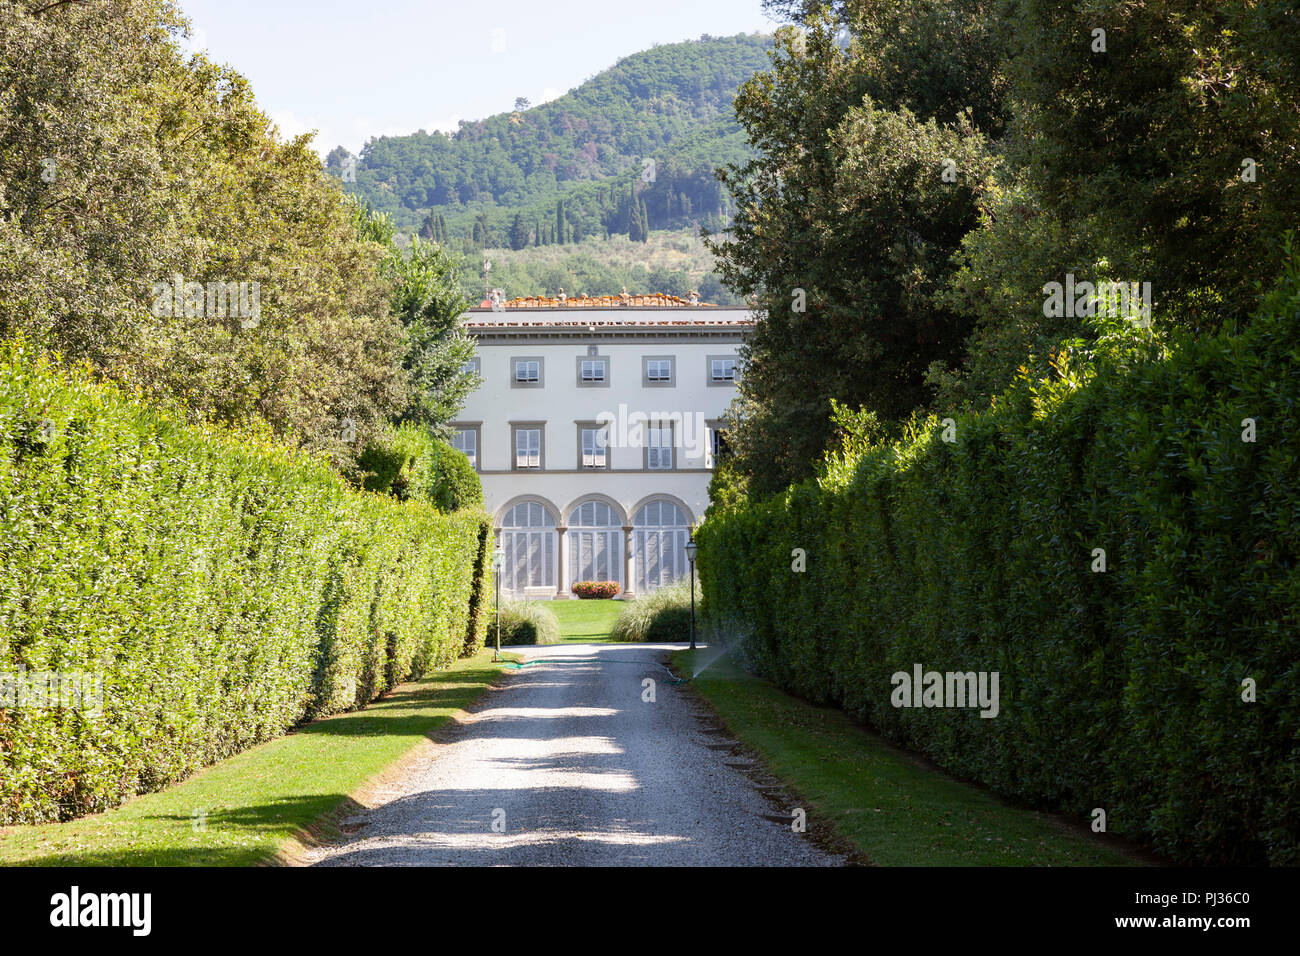 The Grabau villa, at Lucca (Tuscany - Italy). Neoclassical building, the villa presents to visitors to see a nine hectare landscaped botanical garden. Stock Photo